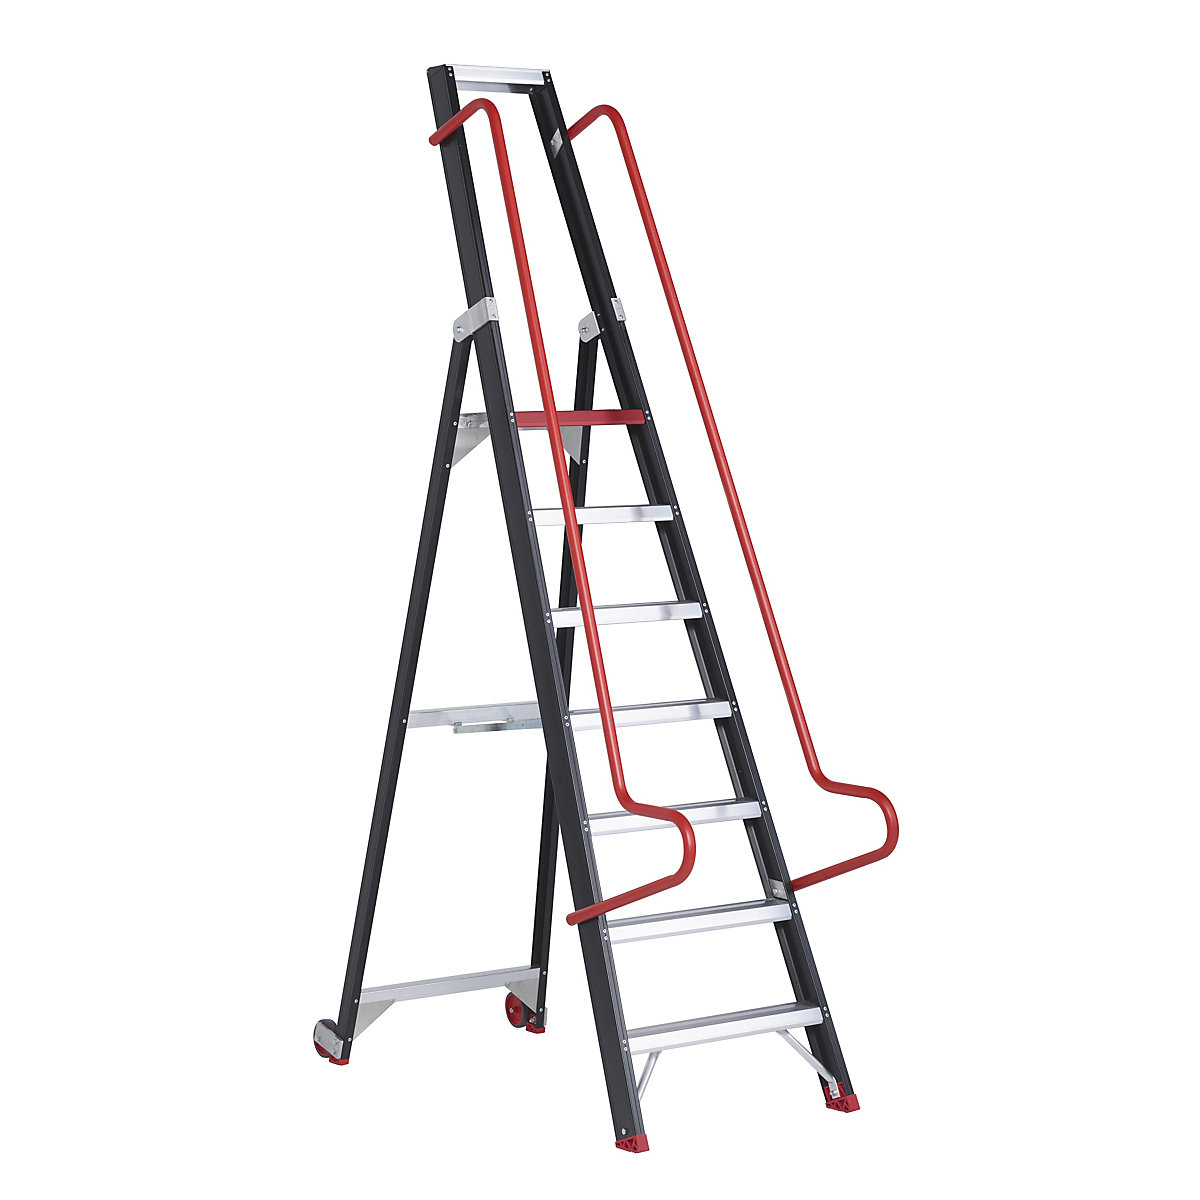 Mobile warehouse steps – Altrex, with safety hand rails, 7 steps incl. platform-7